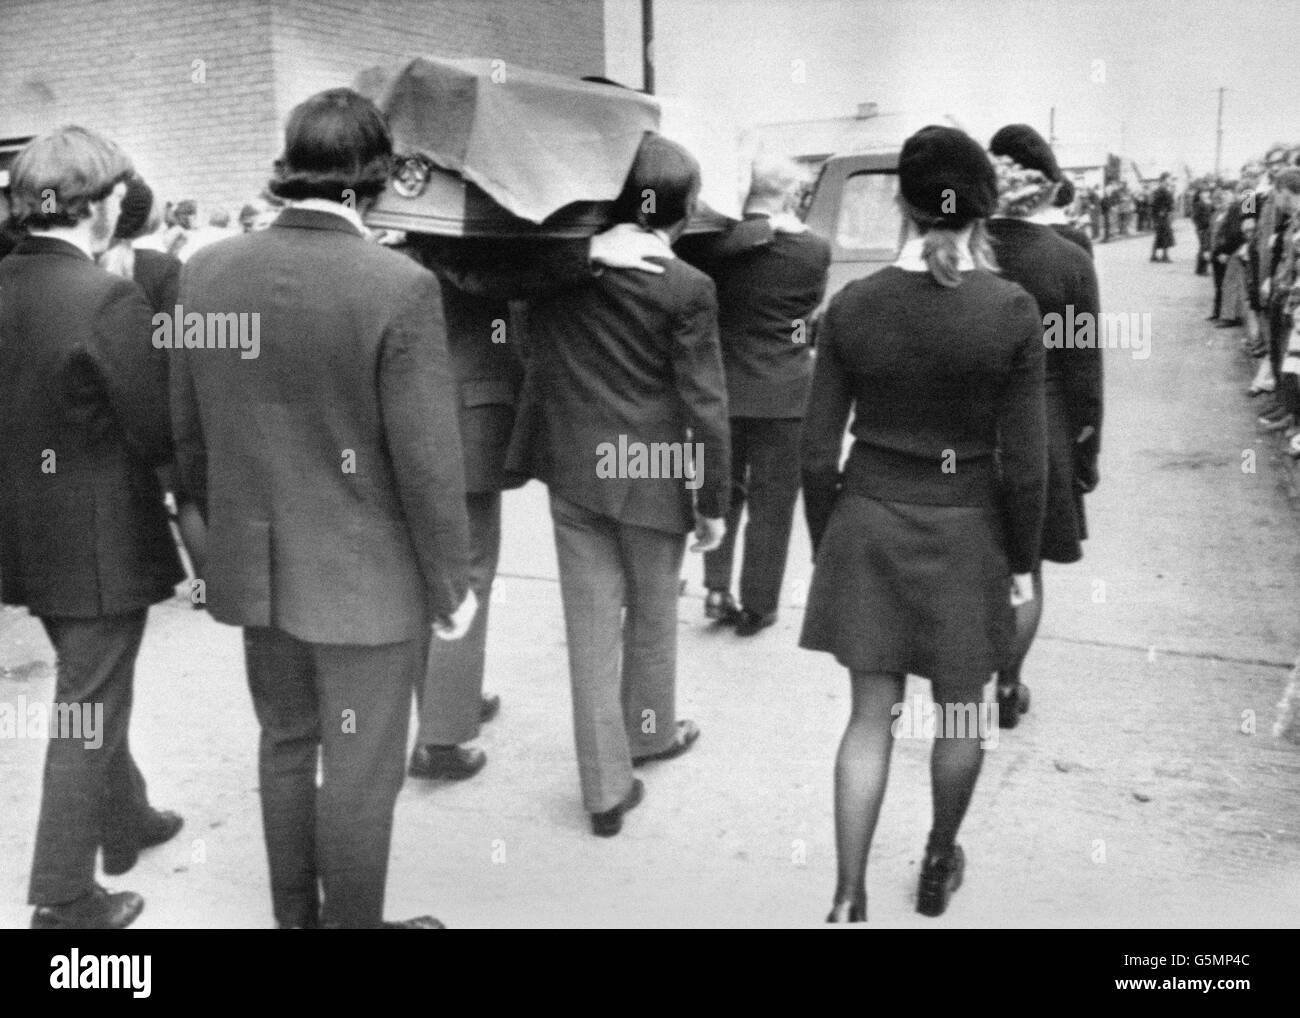 Provisional IRA leader James Bryson is given a military-style funeral in Belfast. The cortege is pictured on its way to Milltown cemetery, escorted by members of the women's IRA and a lone piper. Bryson was killed in a gun battle. Stock Photo